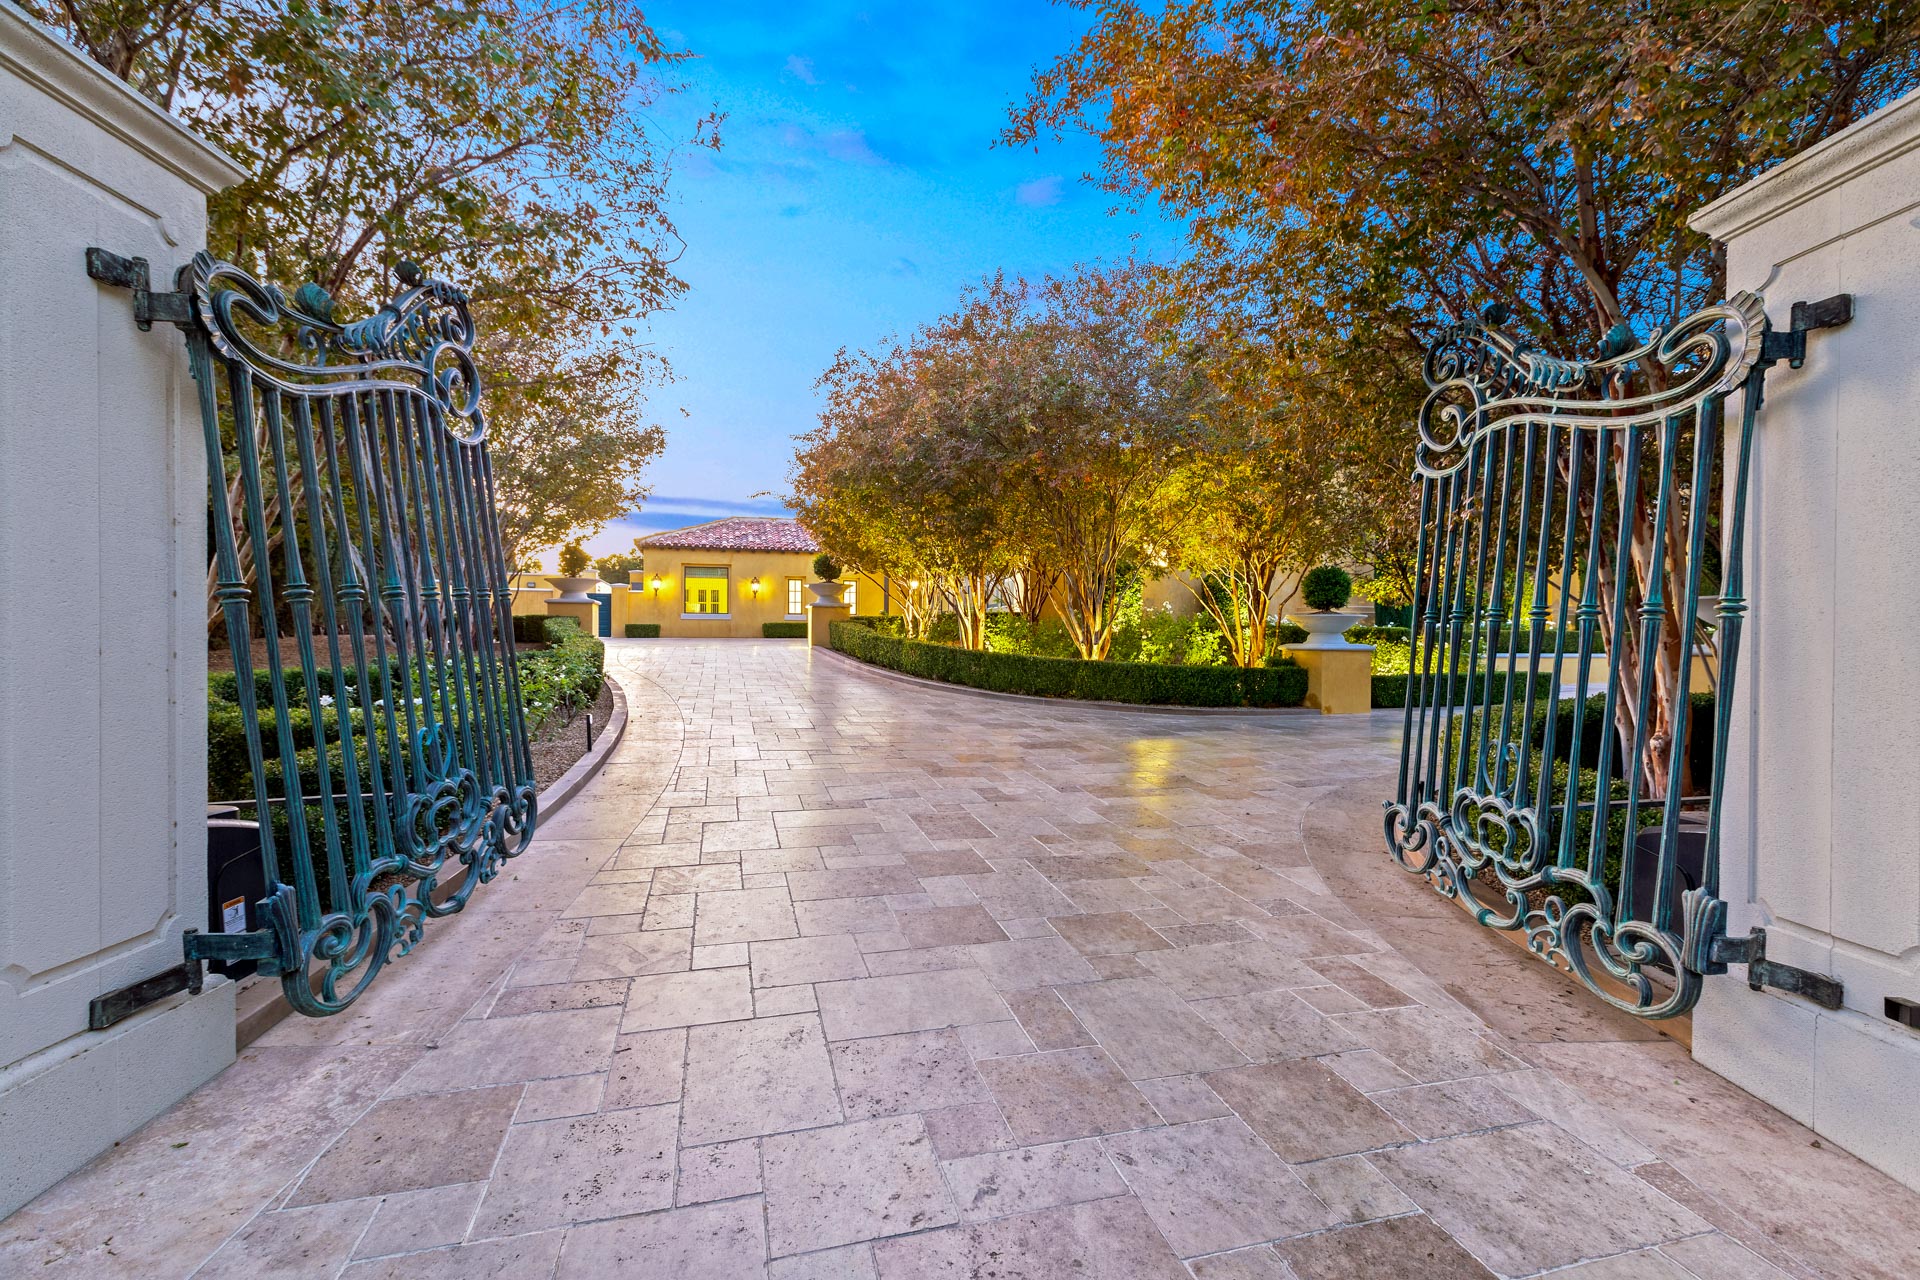 1717 ENCLAVE Court, Las Vegas, Nevada 89134 - $25,000,000 home for sale, house images, photos and pics gallery